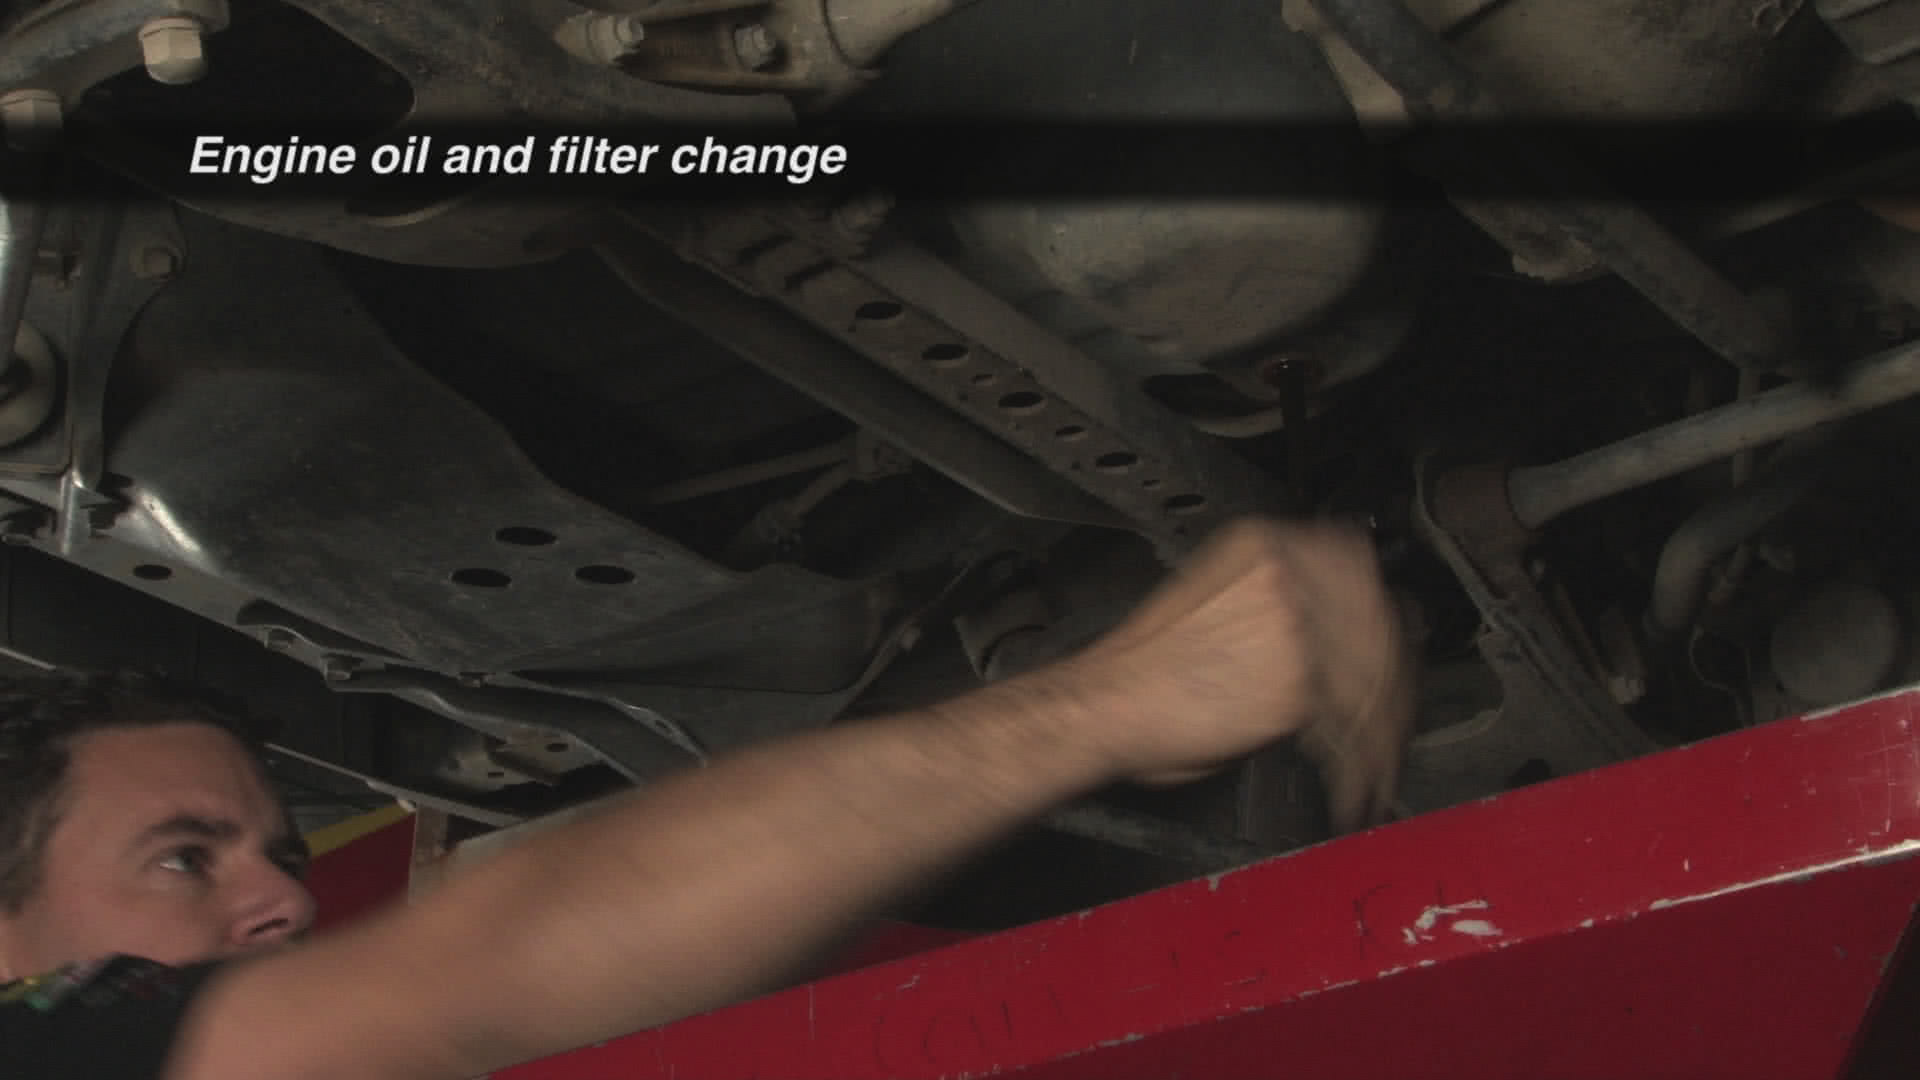 Engine Oil and Filter Change